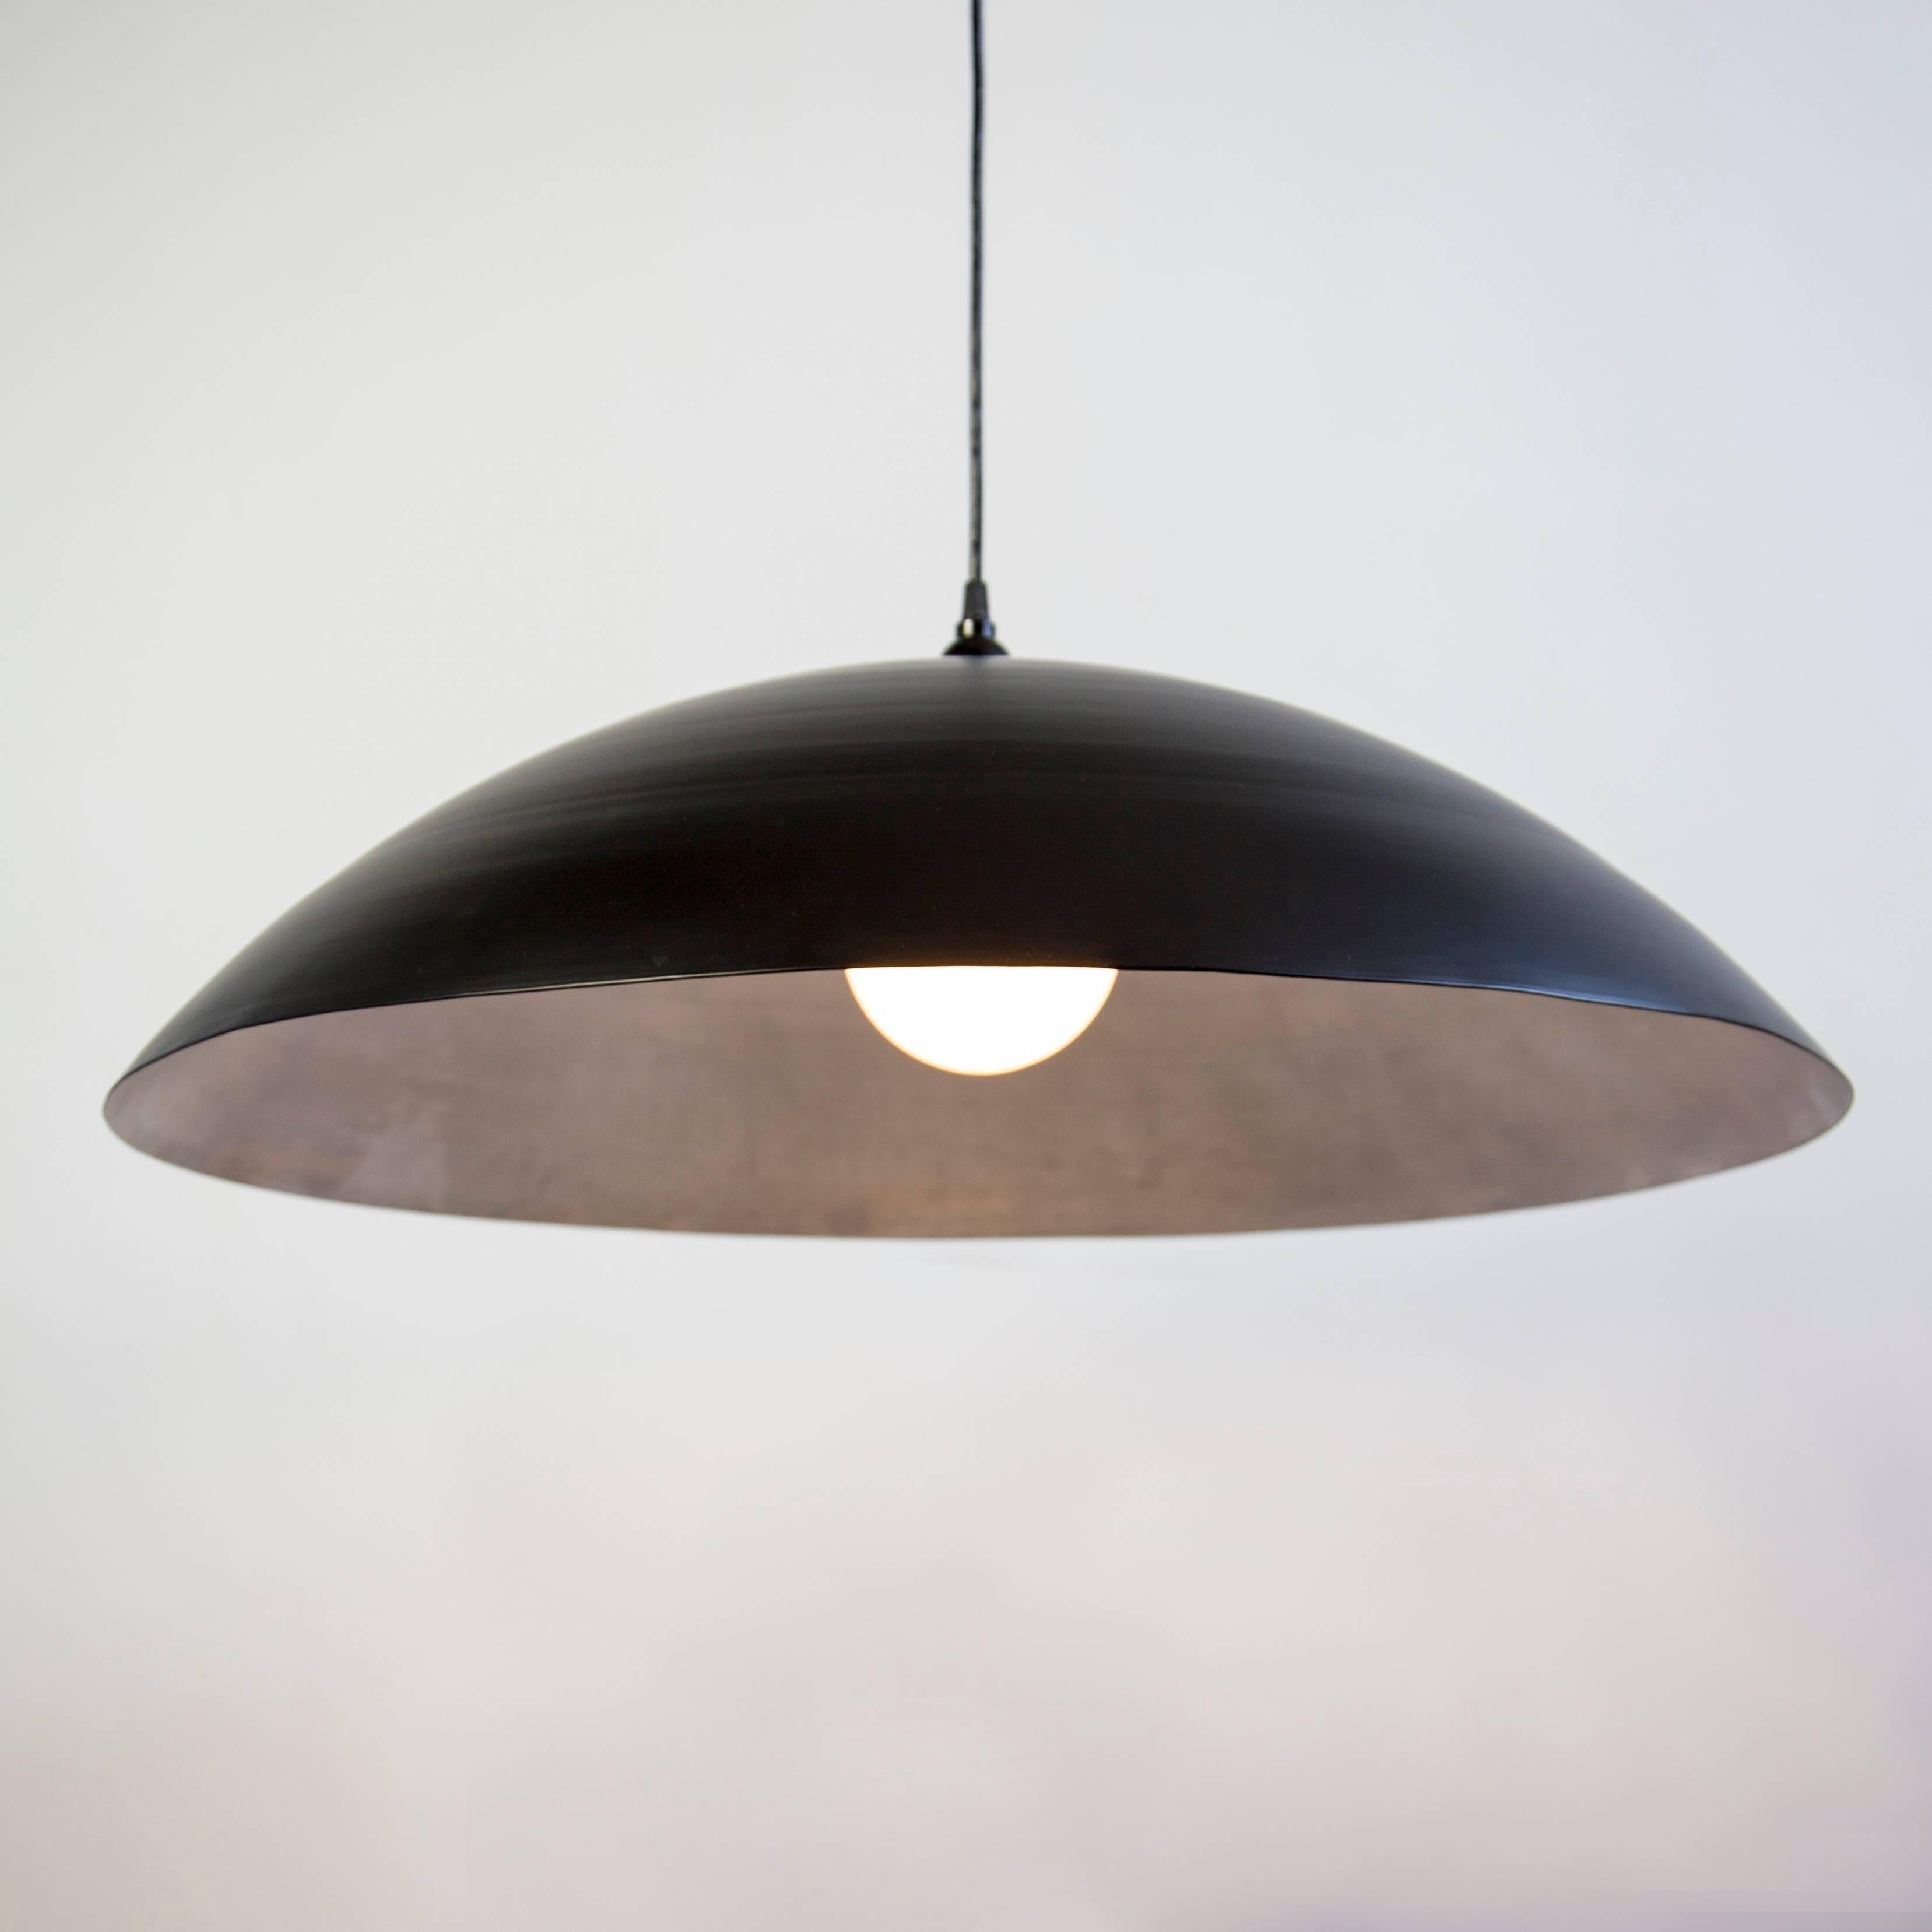 This listing is for 1x Industry Pendant in Matte Black & Waxed Aluminum designed and manufactured by RESEARCH Lighting.

Materials: Aluminum
Finish: Exterior is powder coated in colonial red, interior is waxed aluminum
Electronics: 1x E26 Socket,